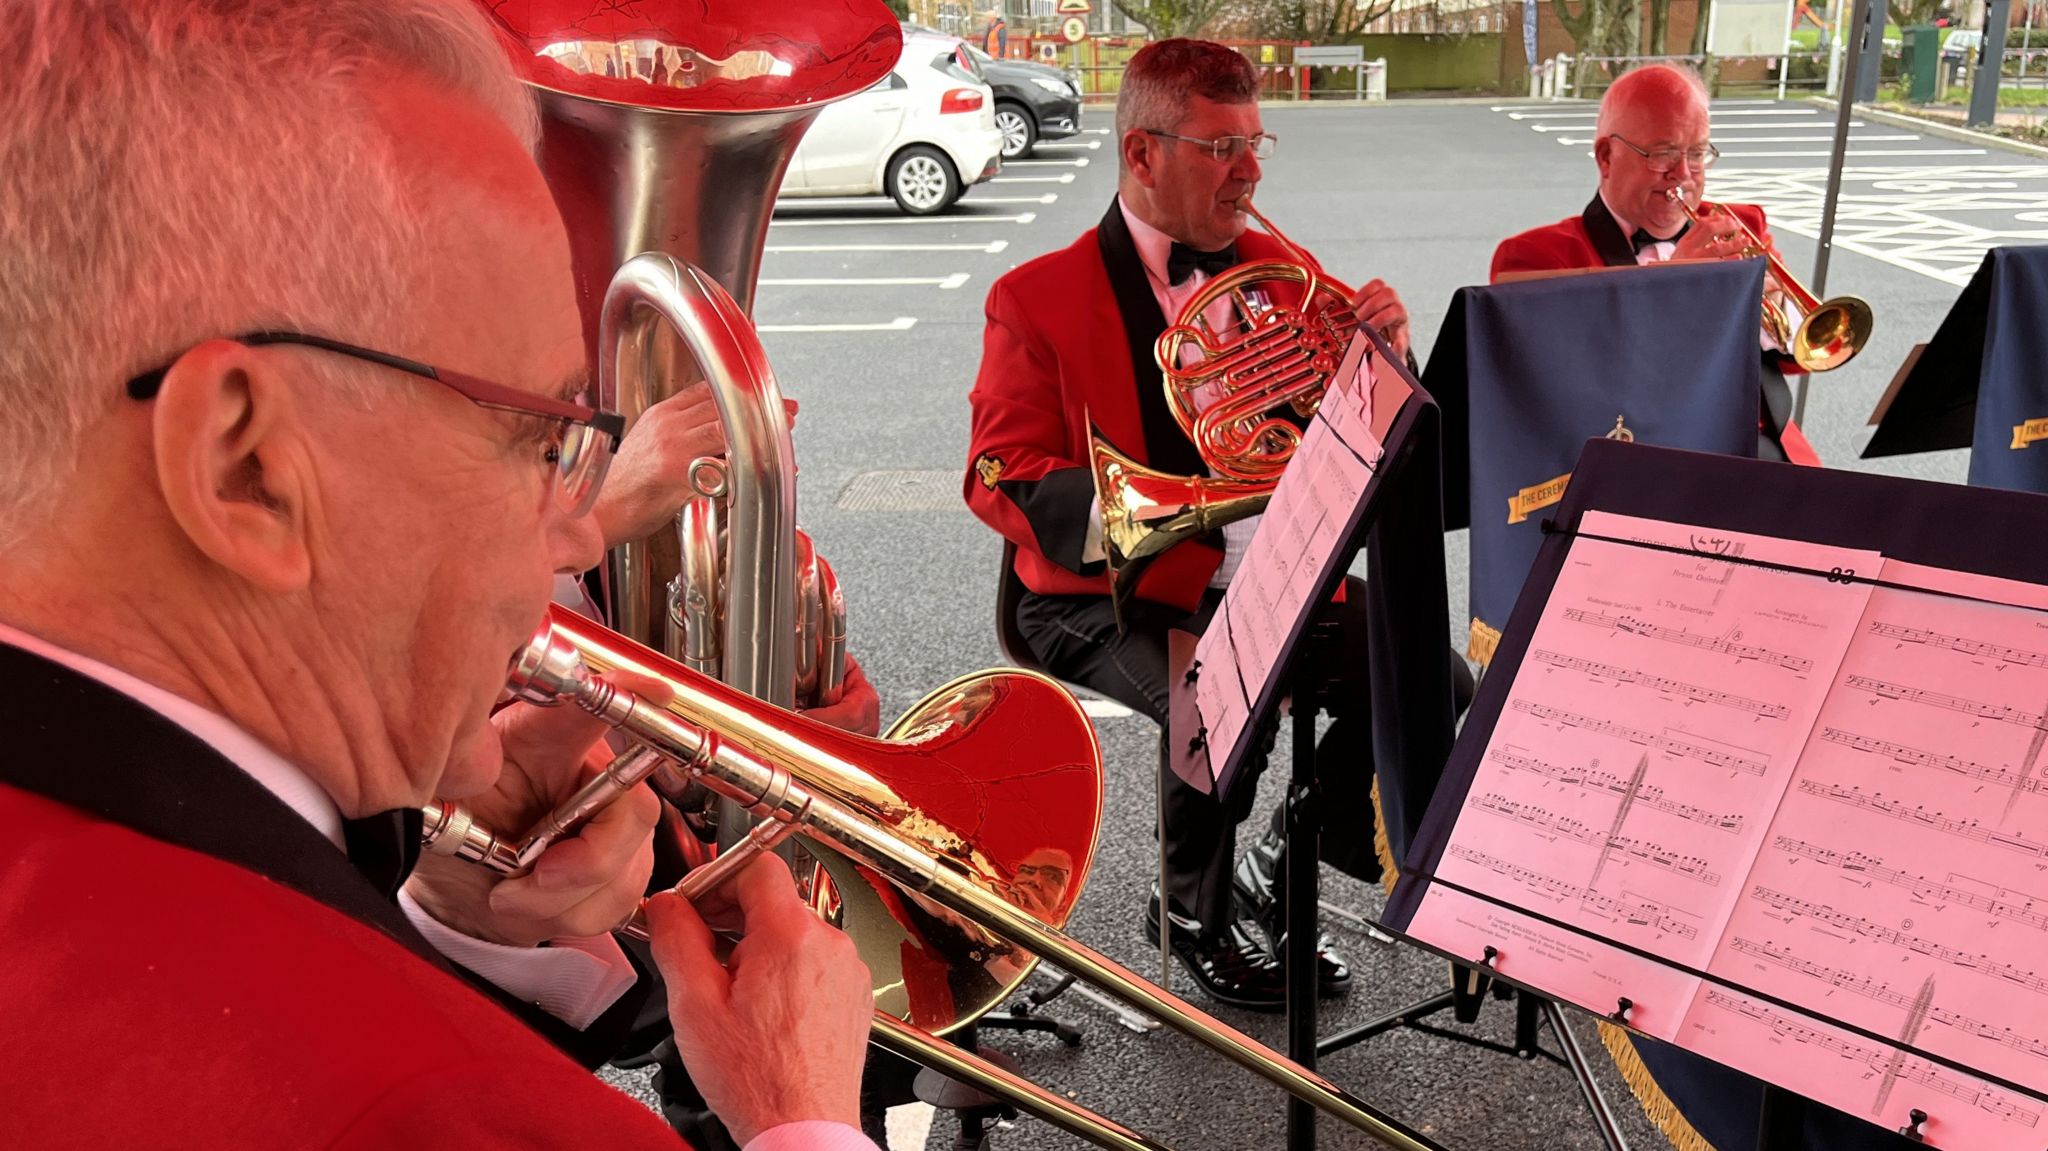 The Ceremonial Military Band playing their brass instruments under a gazebo